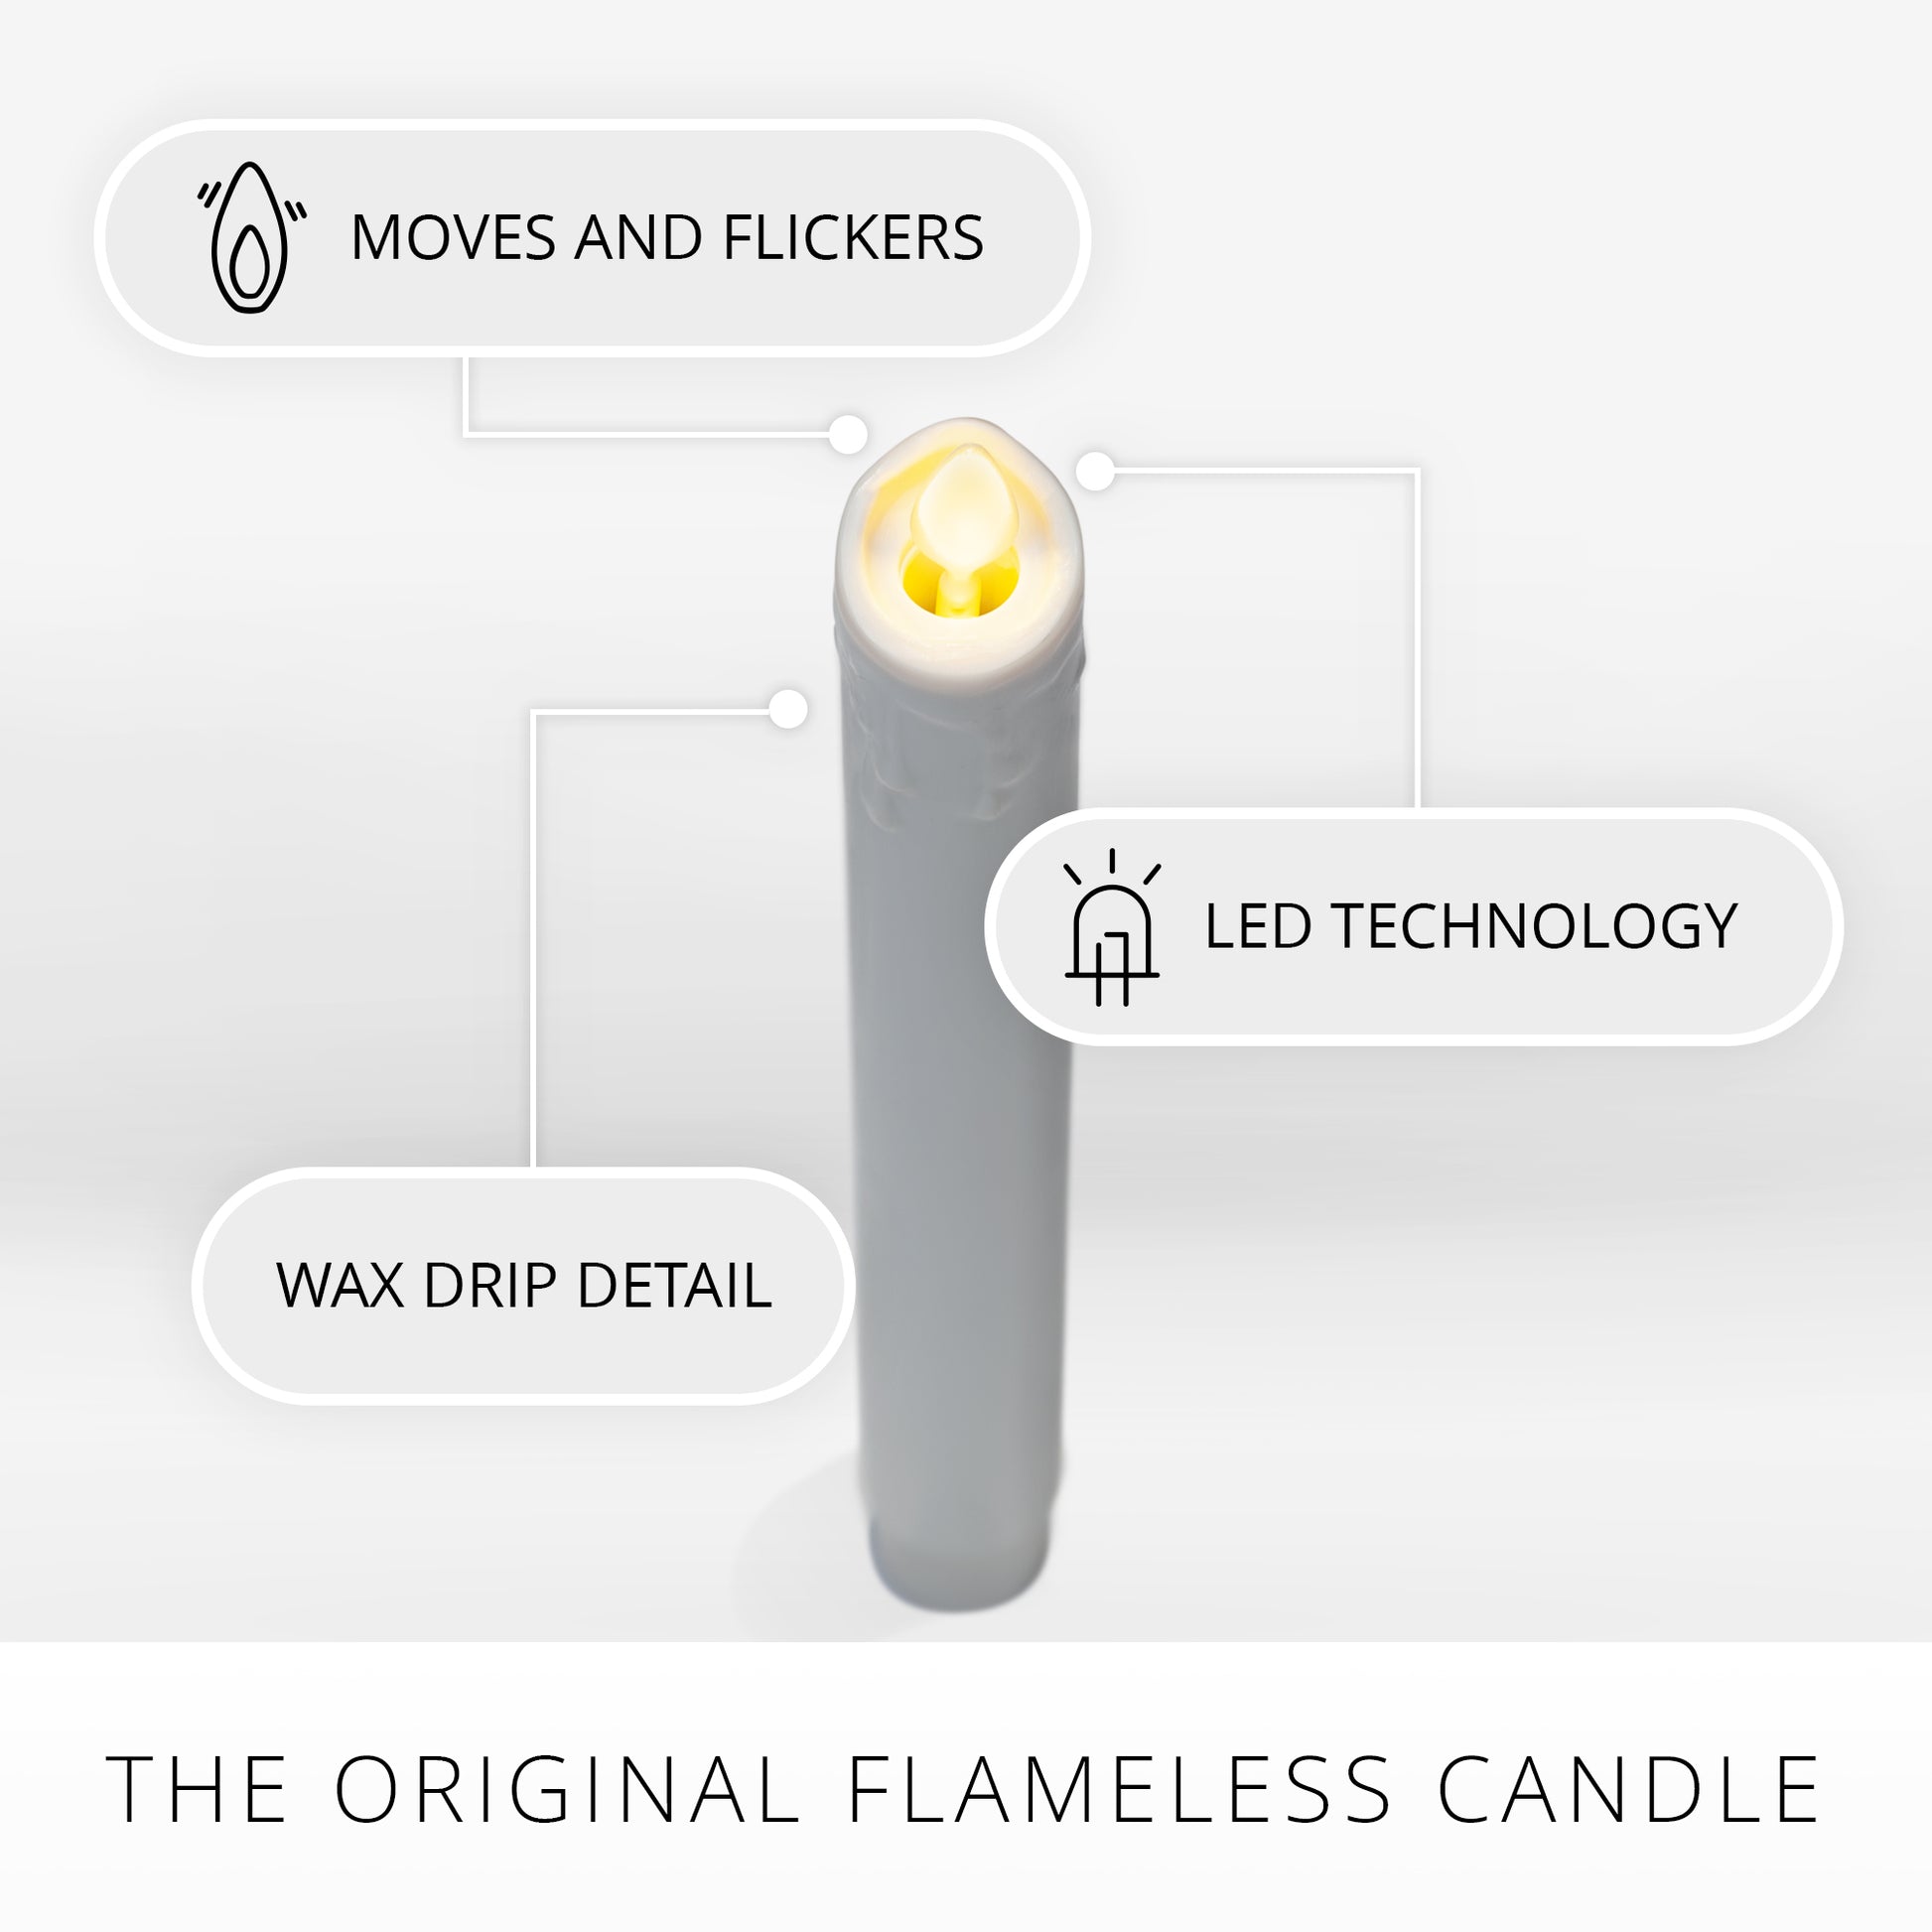 An image of Luminara's flameless white taper candle